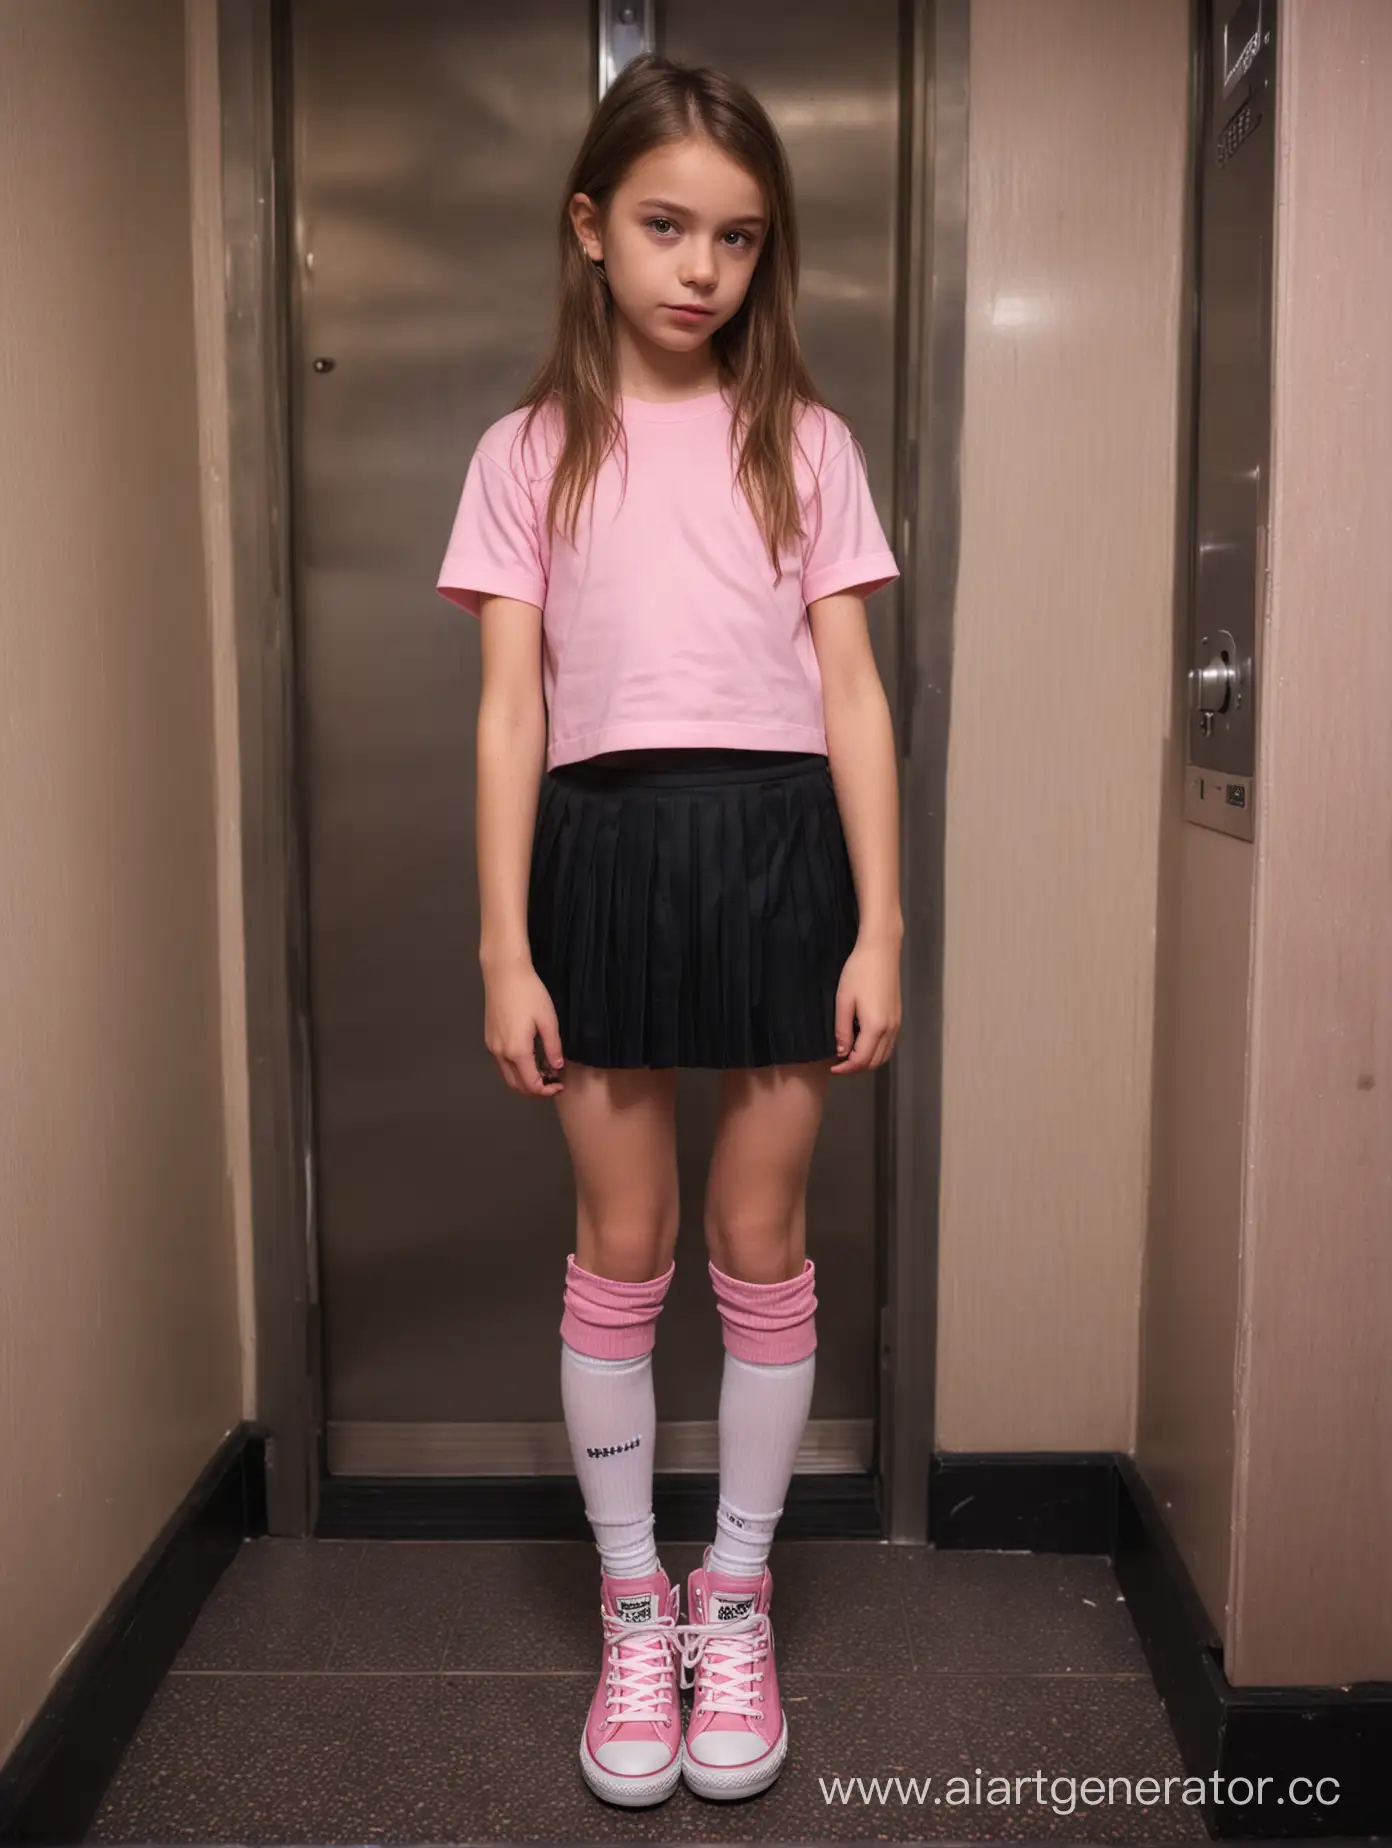 Extremely skinny little girl, 12 years old, crop top, pleated mini skirt, mixed pink and white colors knee above high socks, mini converse shoes, in the elevator, very low light, sad, soft eyes, pursing lips, from above, close up, slim pink lips, 